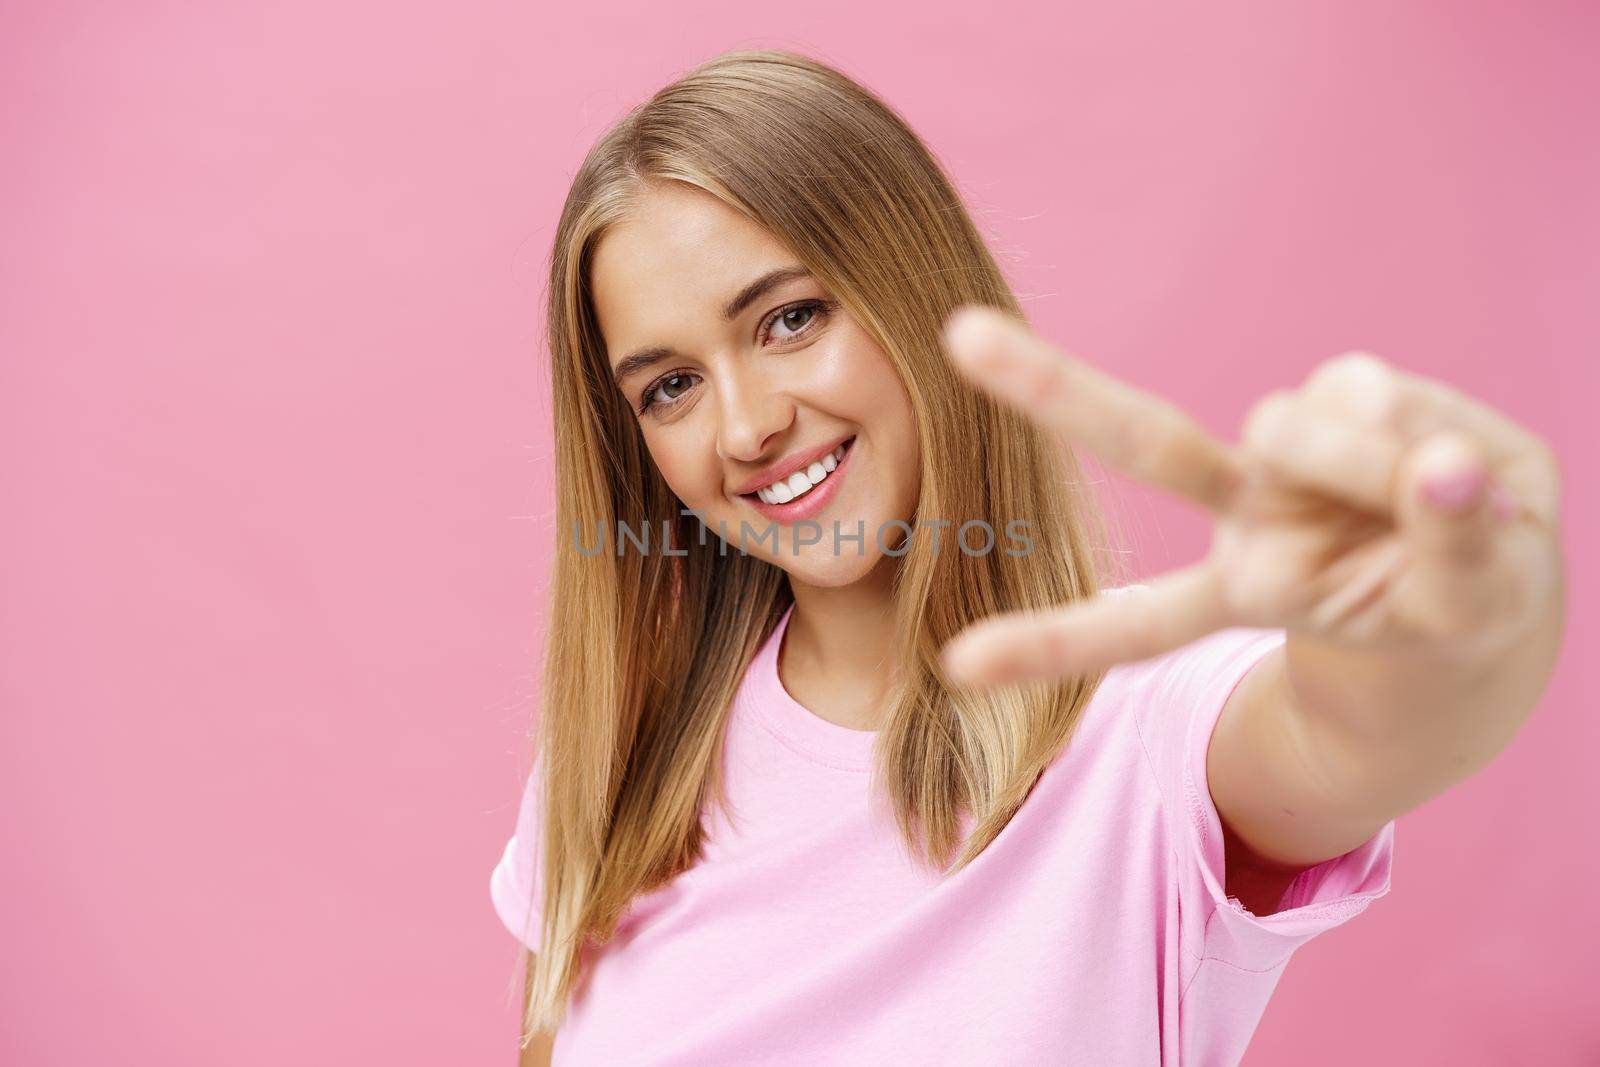 Peaceful and joyful good-looking young girl with straight blond hair in t-shirt pulling hand with peace sign towards camera, tilting head smiling friendly posing against pink background.